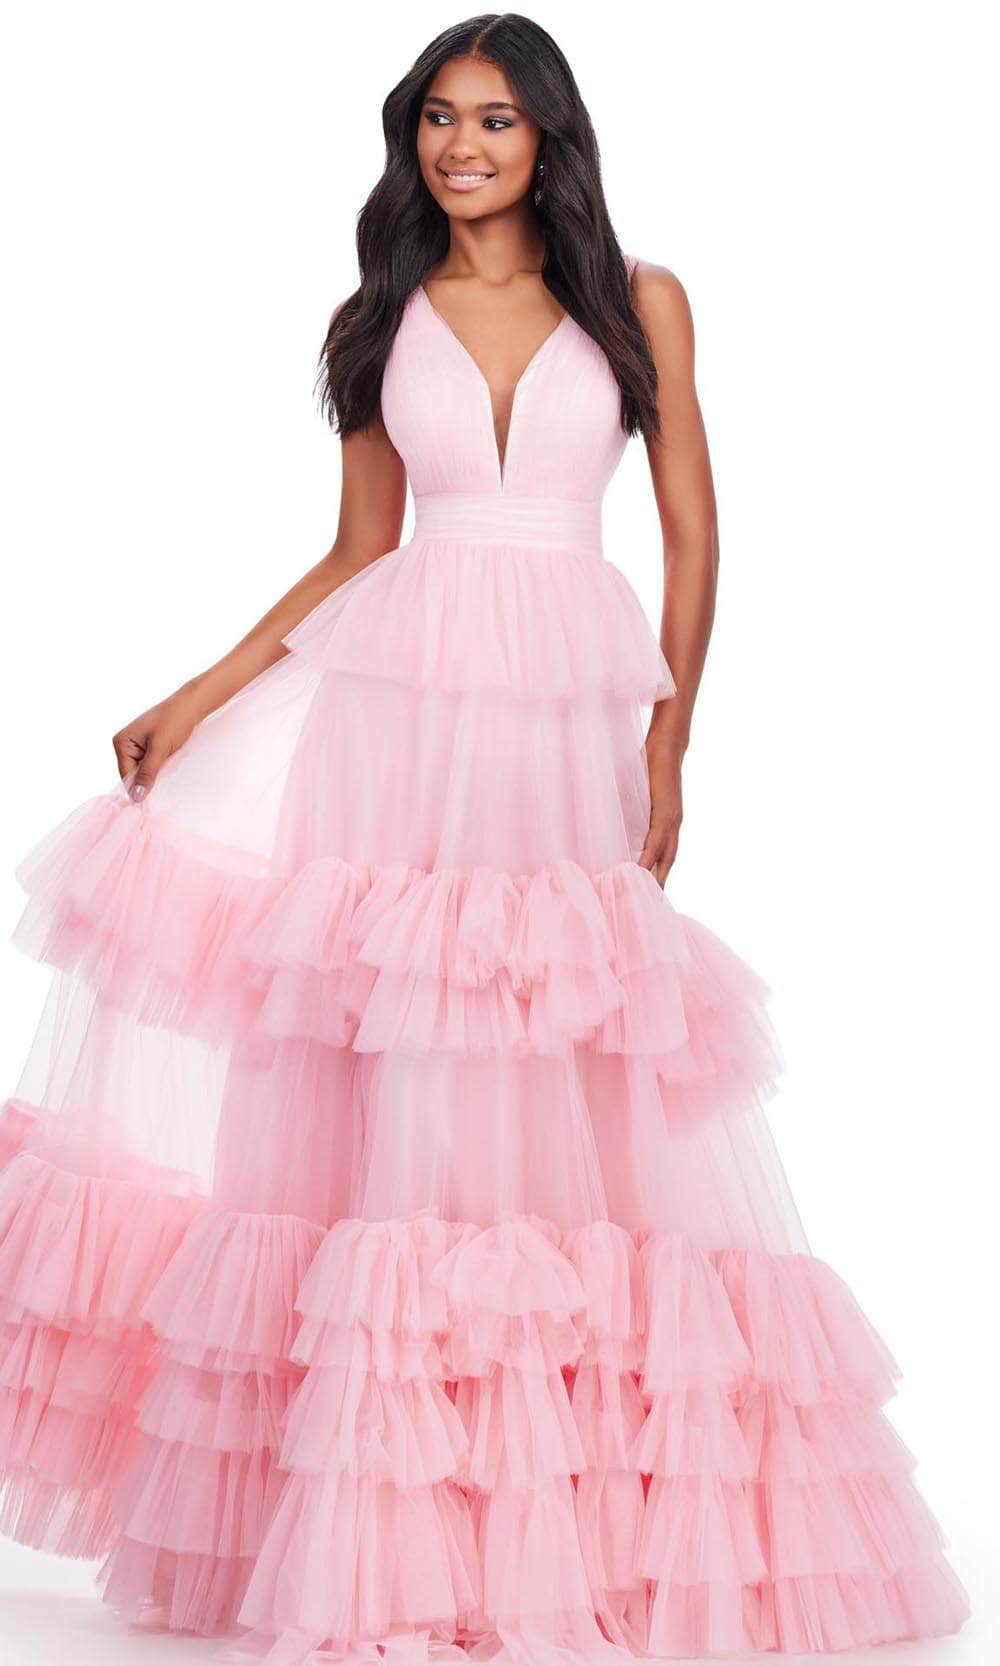 Image of Ashley Lauren 11620 - Tiered Tulle Prom Dress